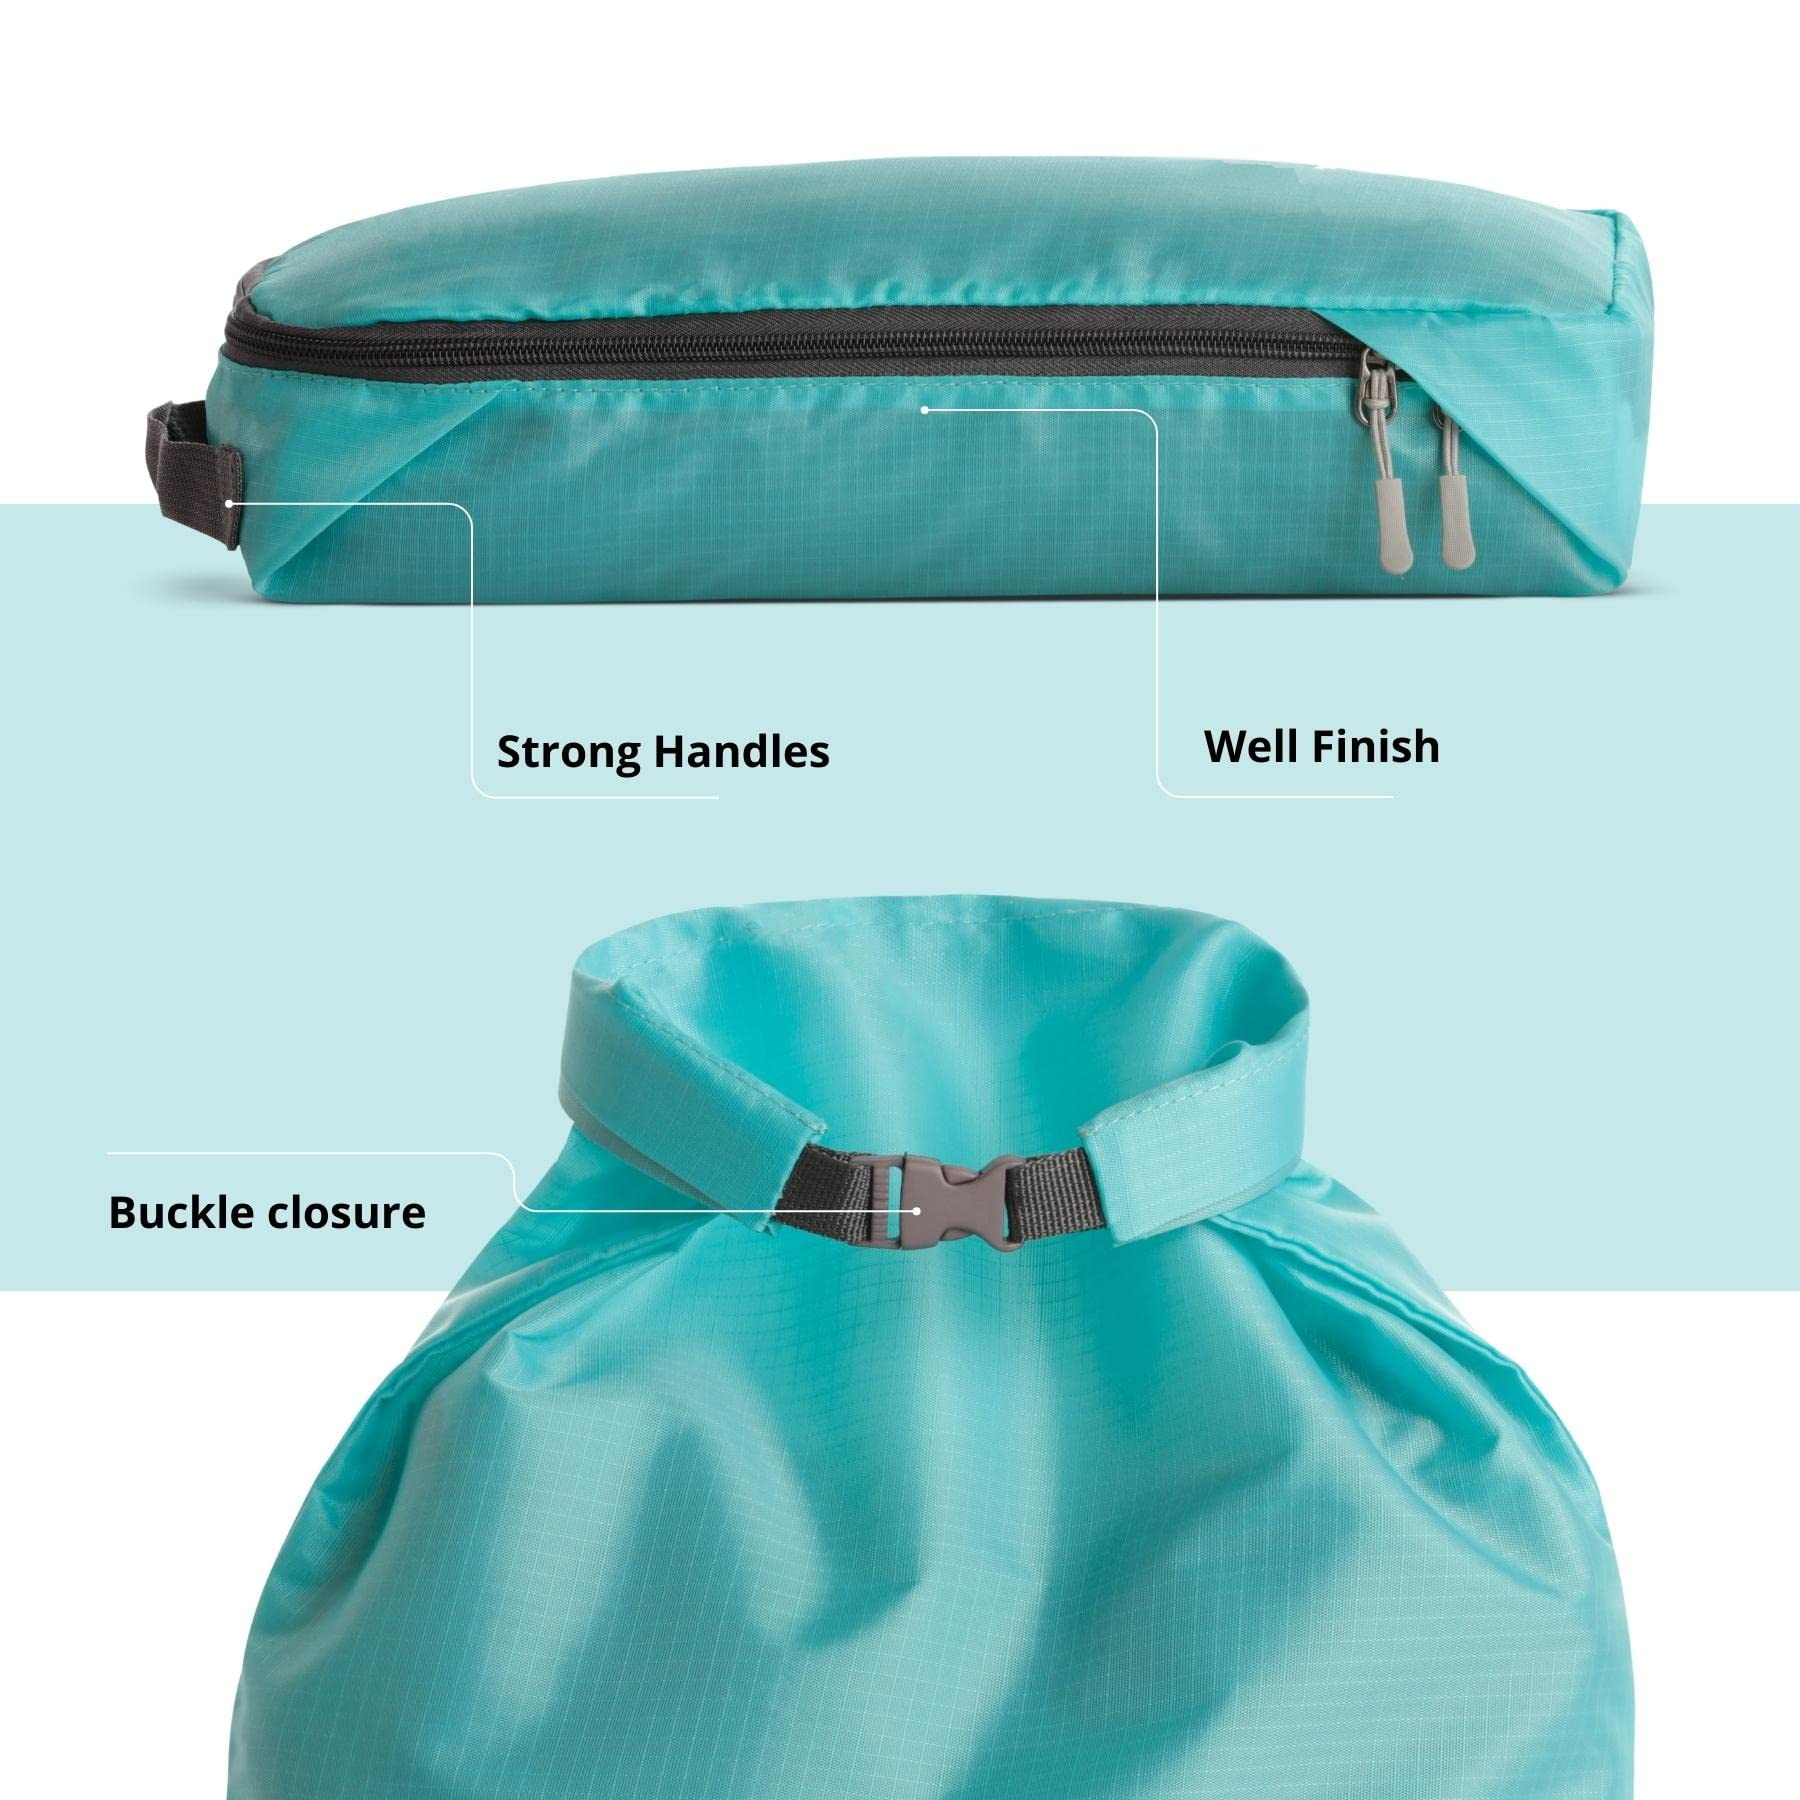 Compression Packing Cubes 6 Pieces Product Details